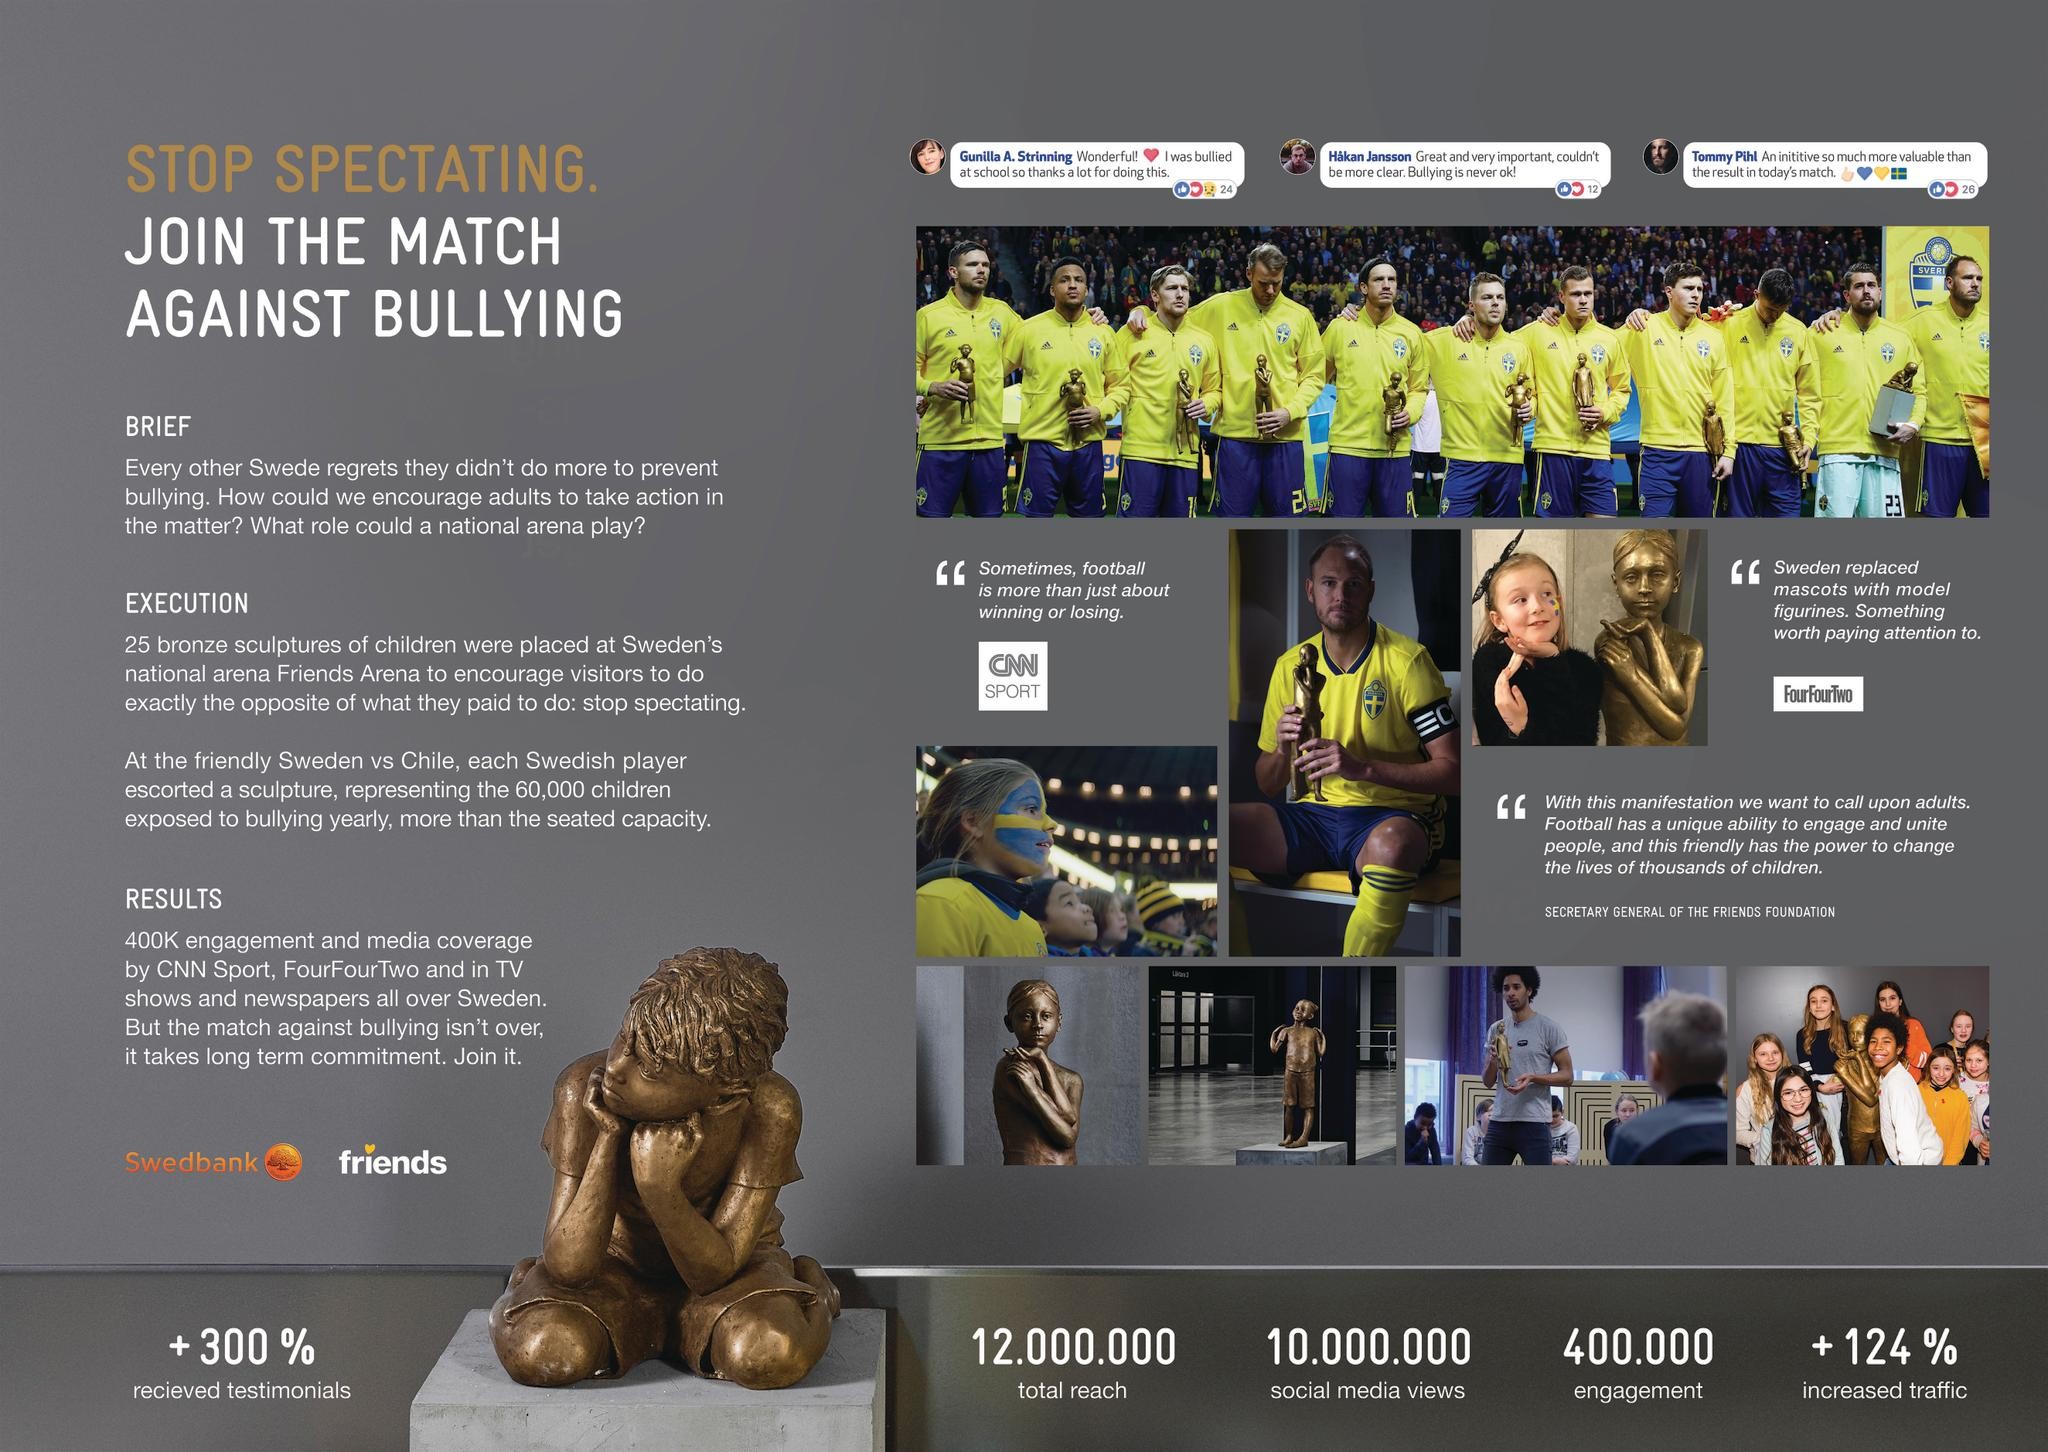 Stop spectating - The match against bullying